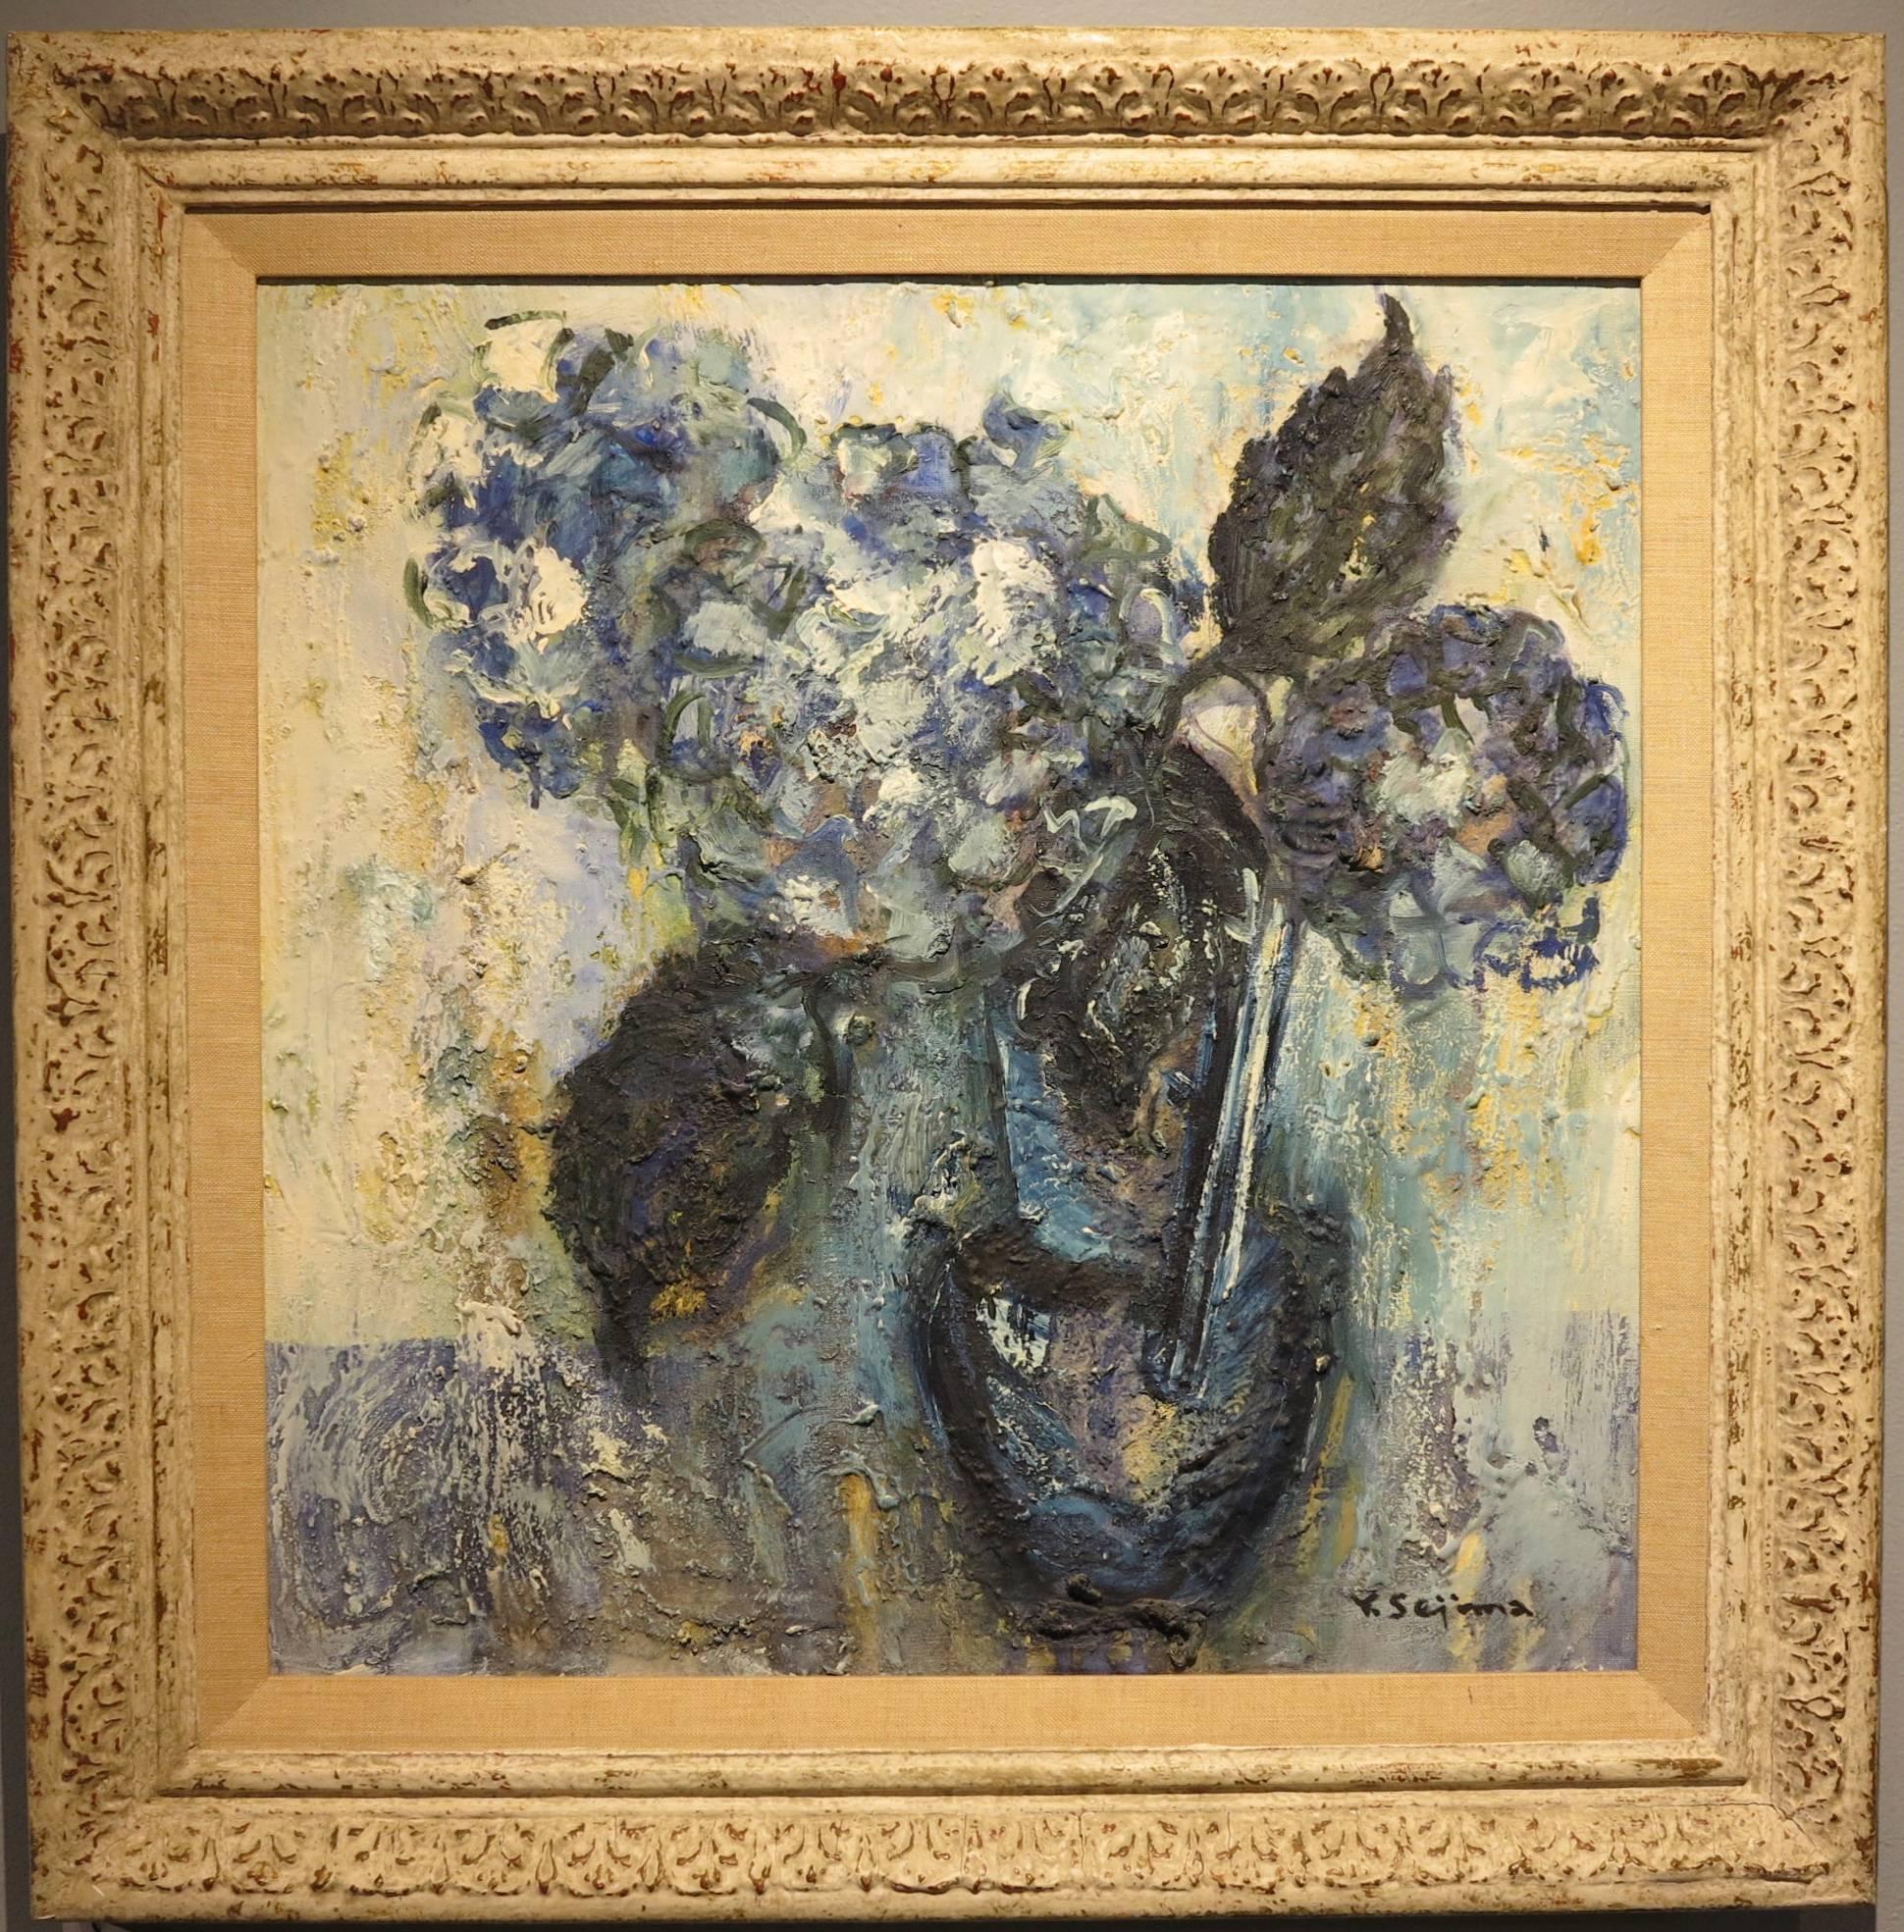 Blue Hydrangeas (abstract Impressionist Japanese floral still life painting) - Painting by Unknown